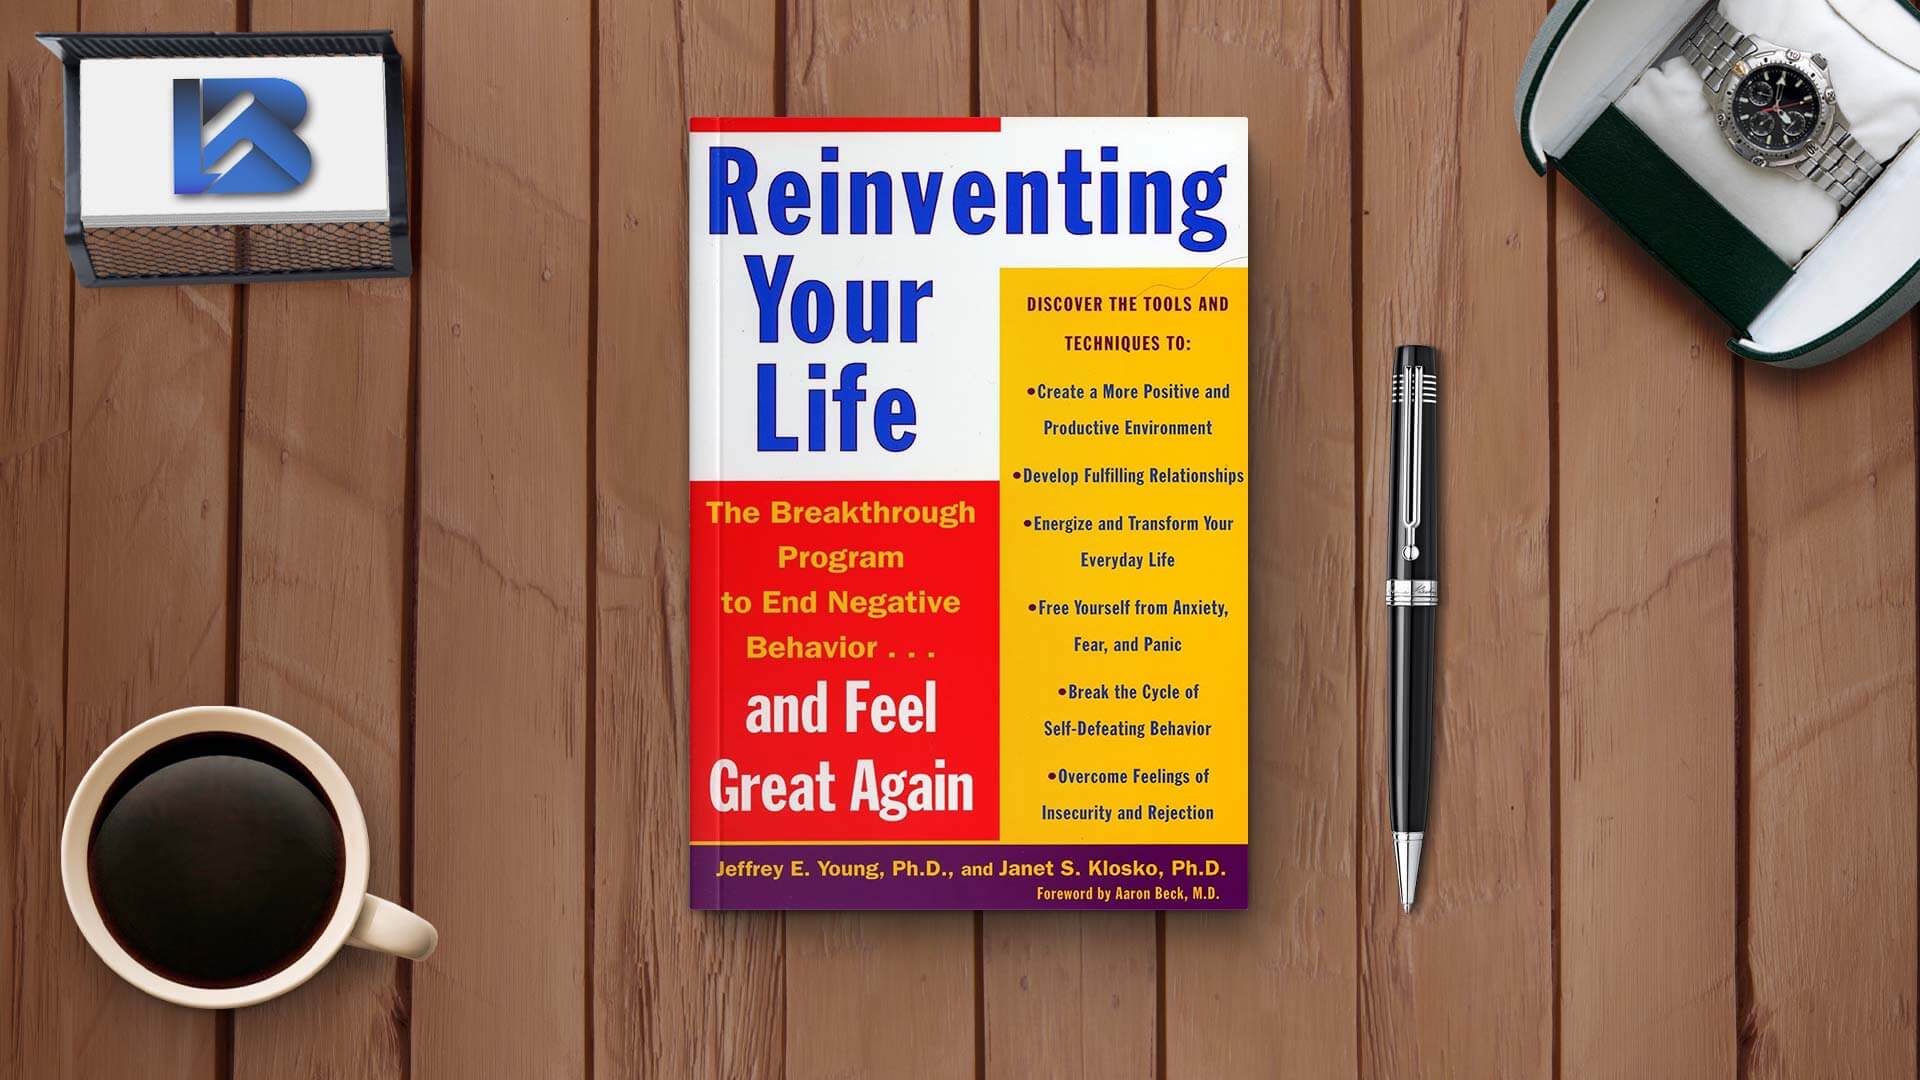 Reinventing Your Life PDF Download